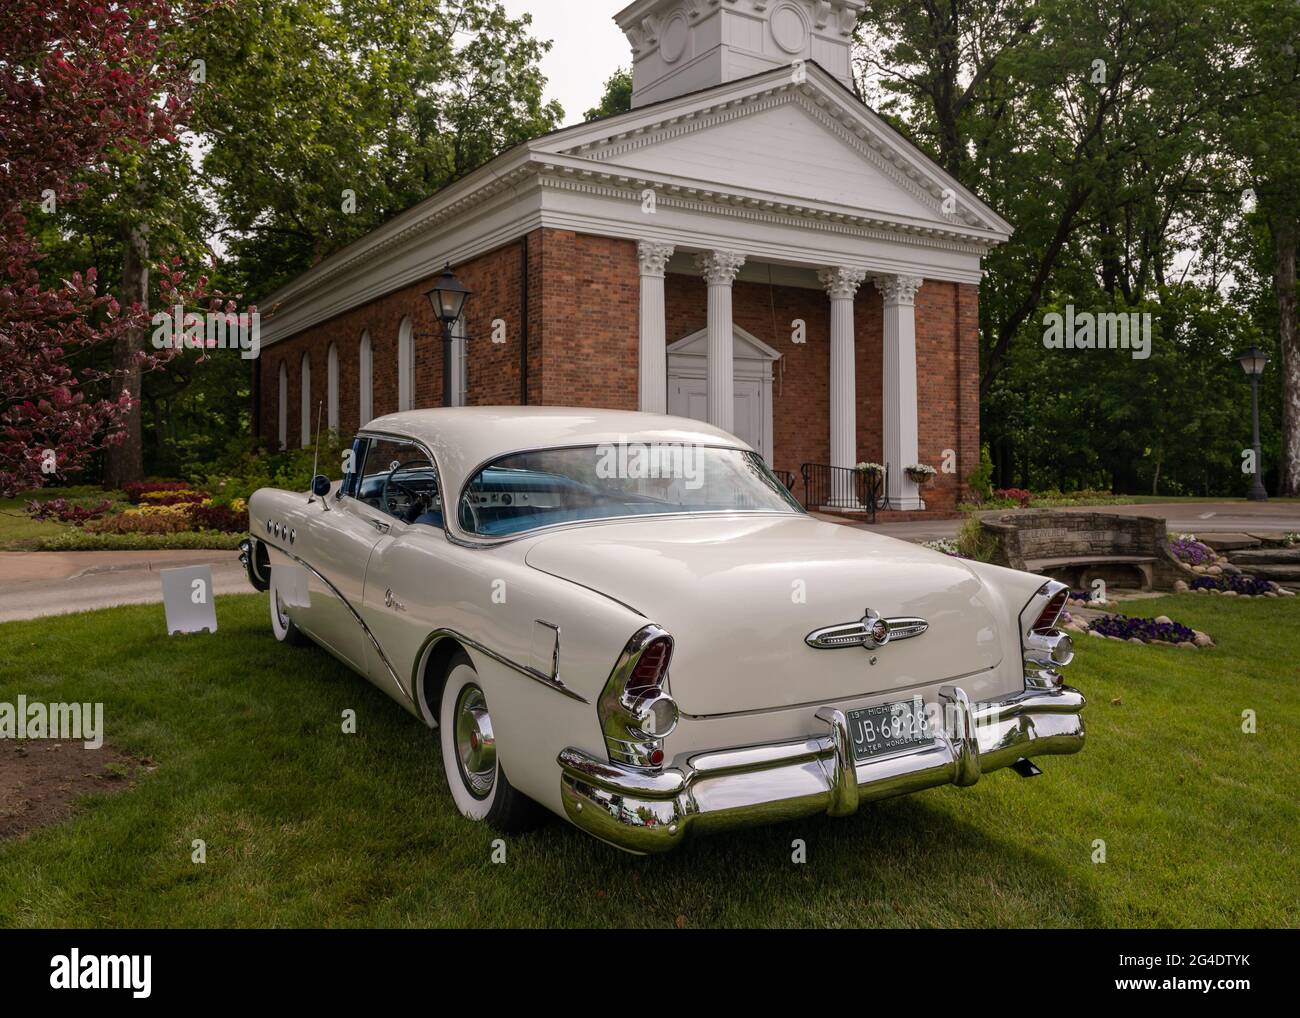 DEARBORN, MI/USA - JUNE 19, 2021: A 1955 Buick Super car at the The Henry Ford (THF) Motor Muster car show, at Greenfield Village, near Detroit, MI. Stock Photo